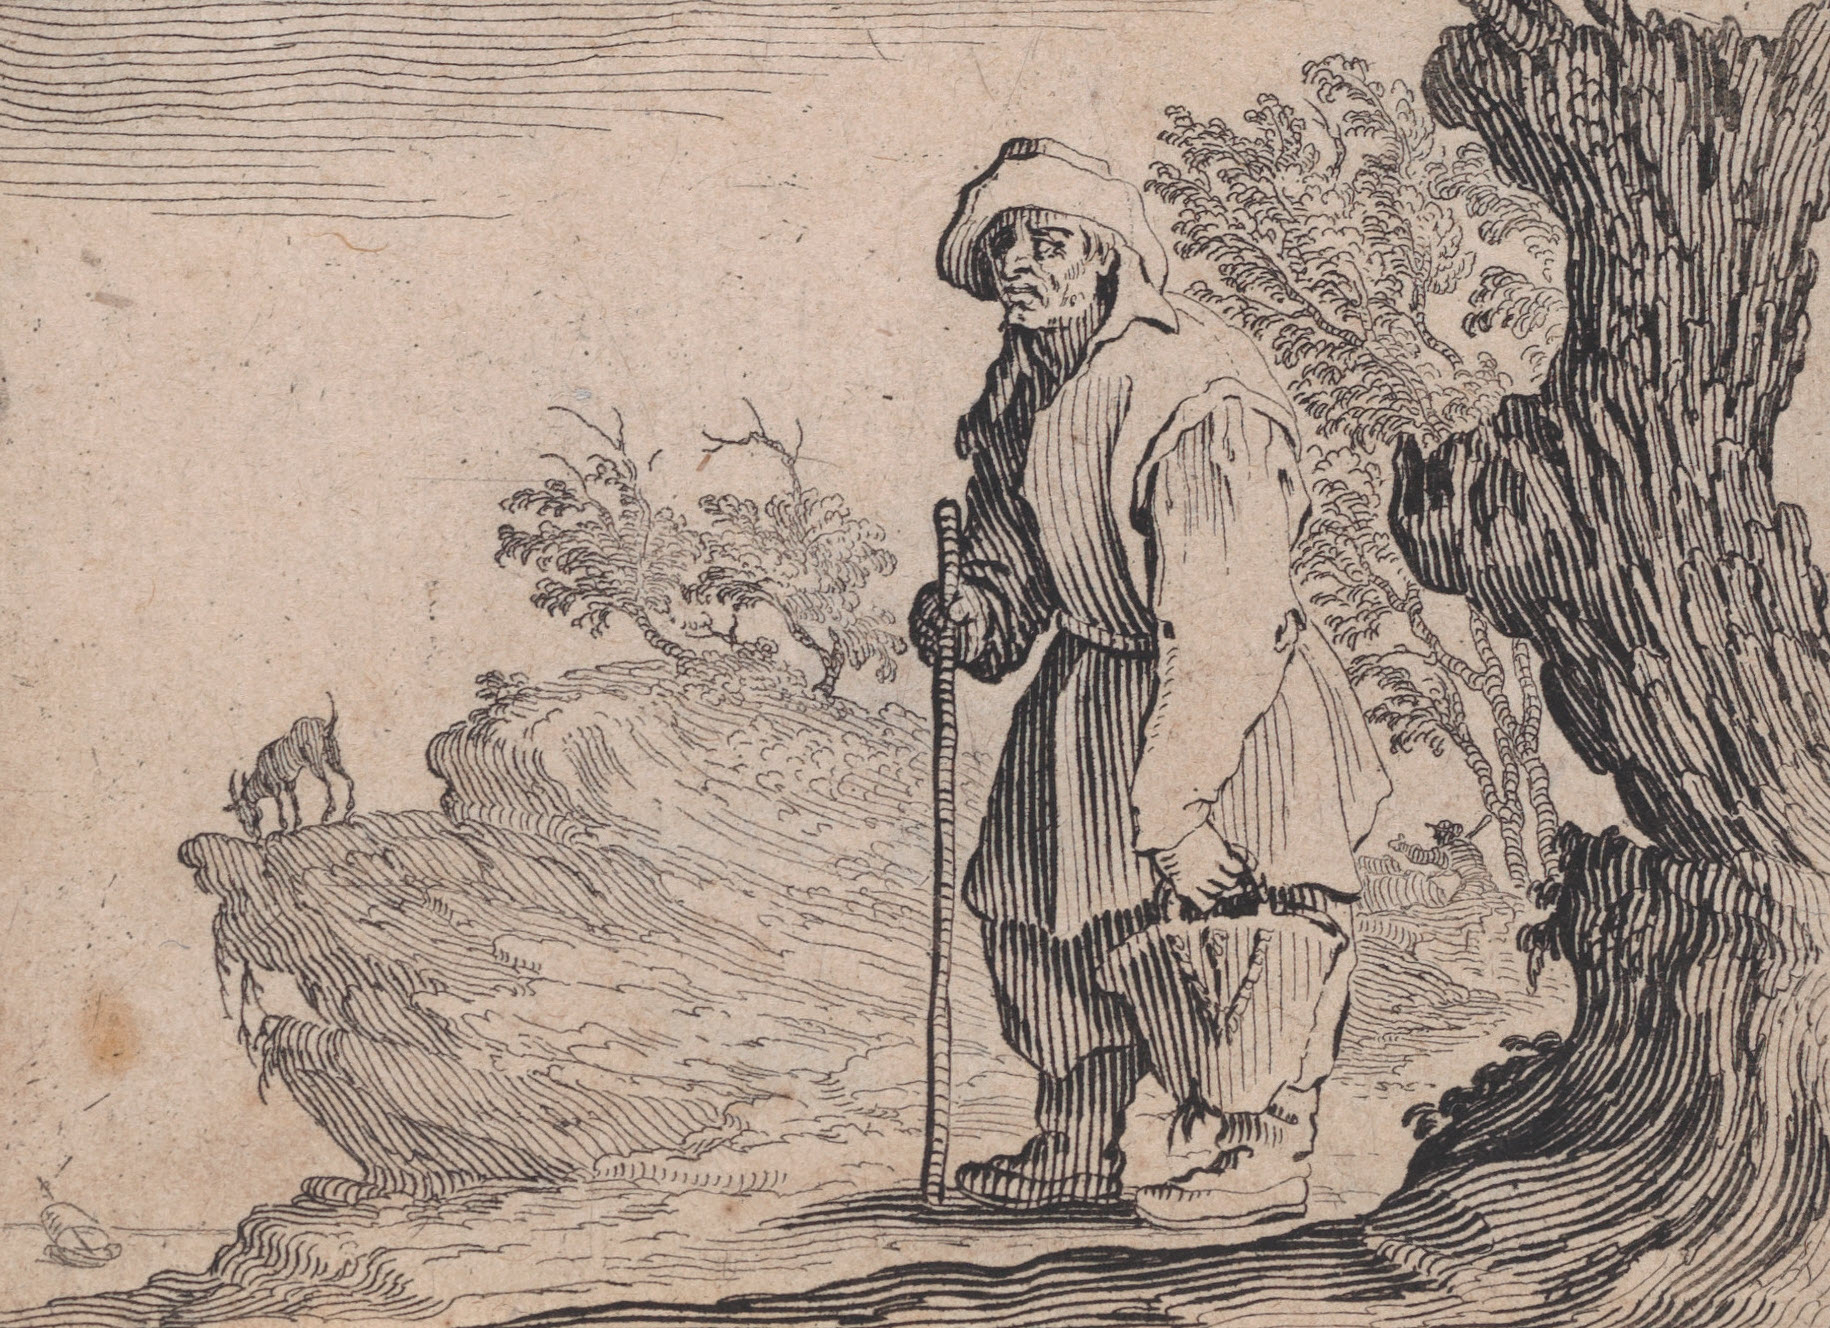 Peasant Carrying his Sack - A Caricature by Callot